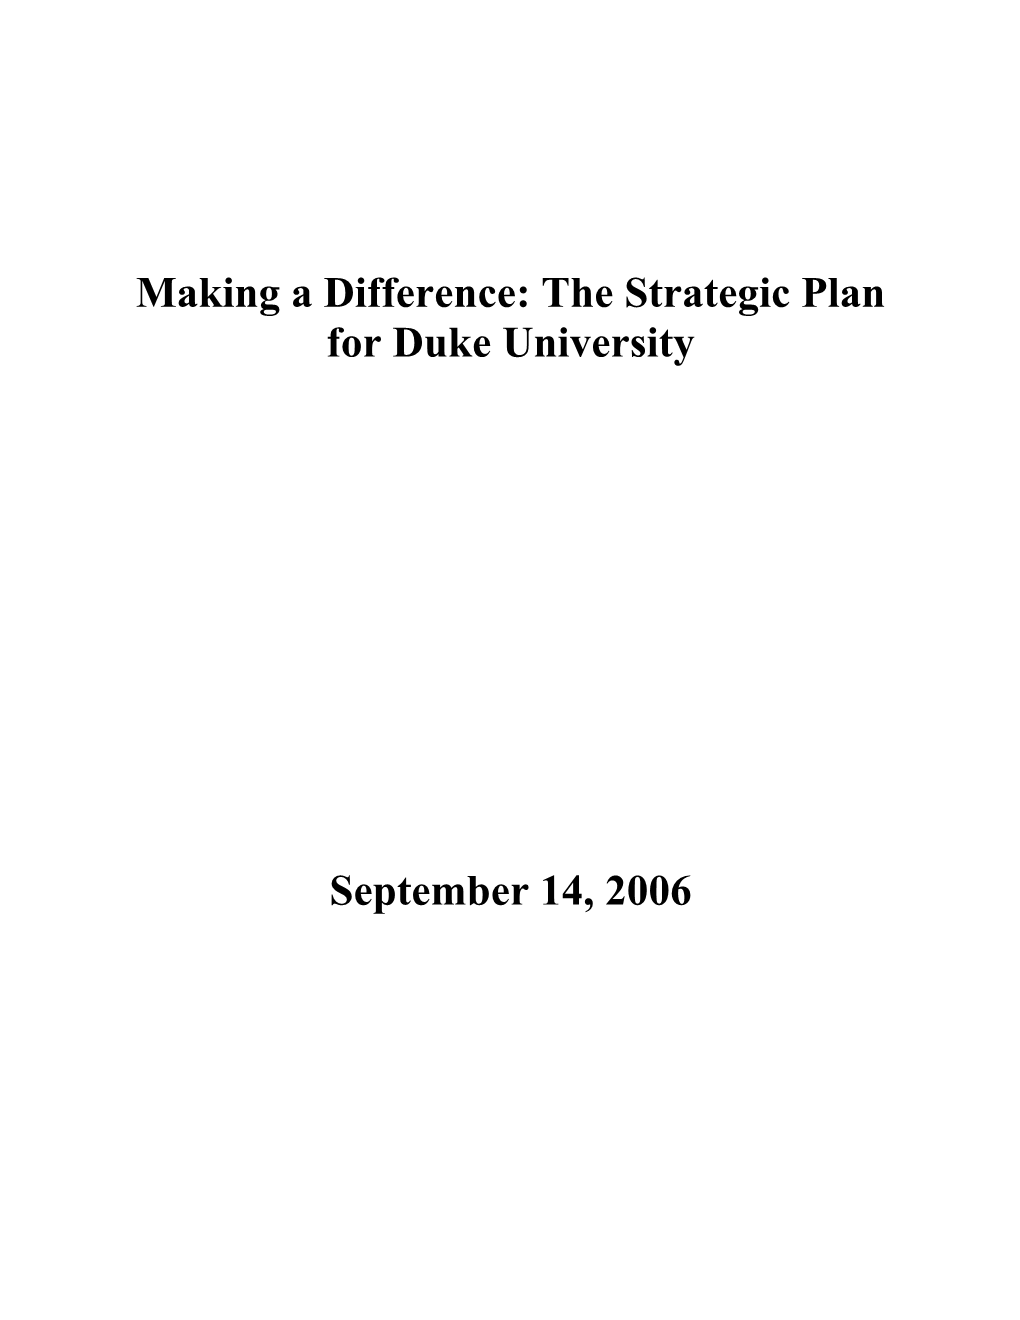 Making a Difference: the Strategic Plan for Duke University